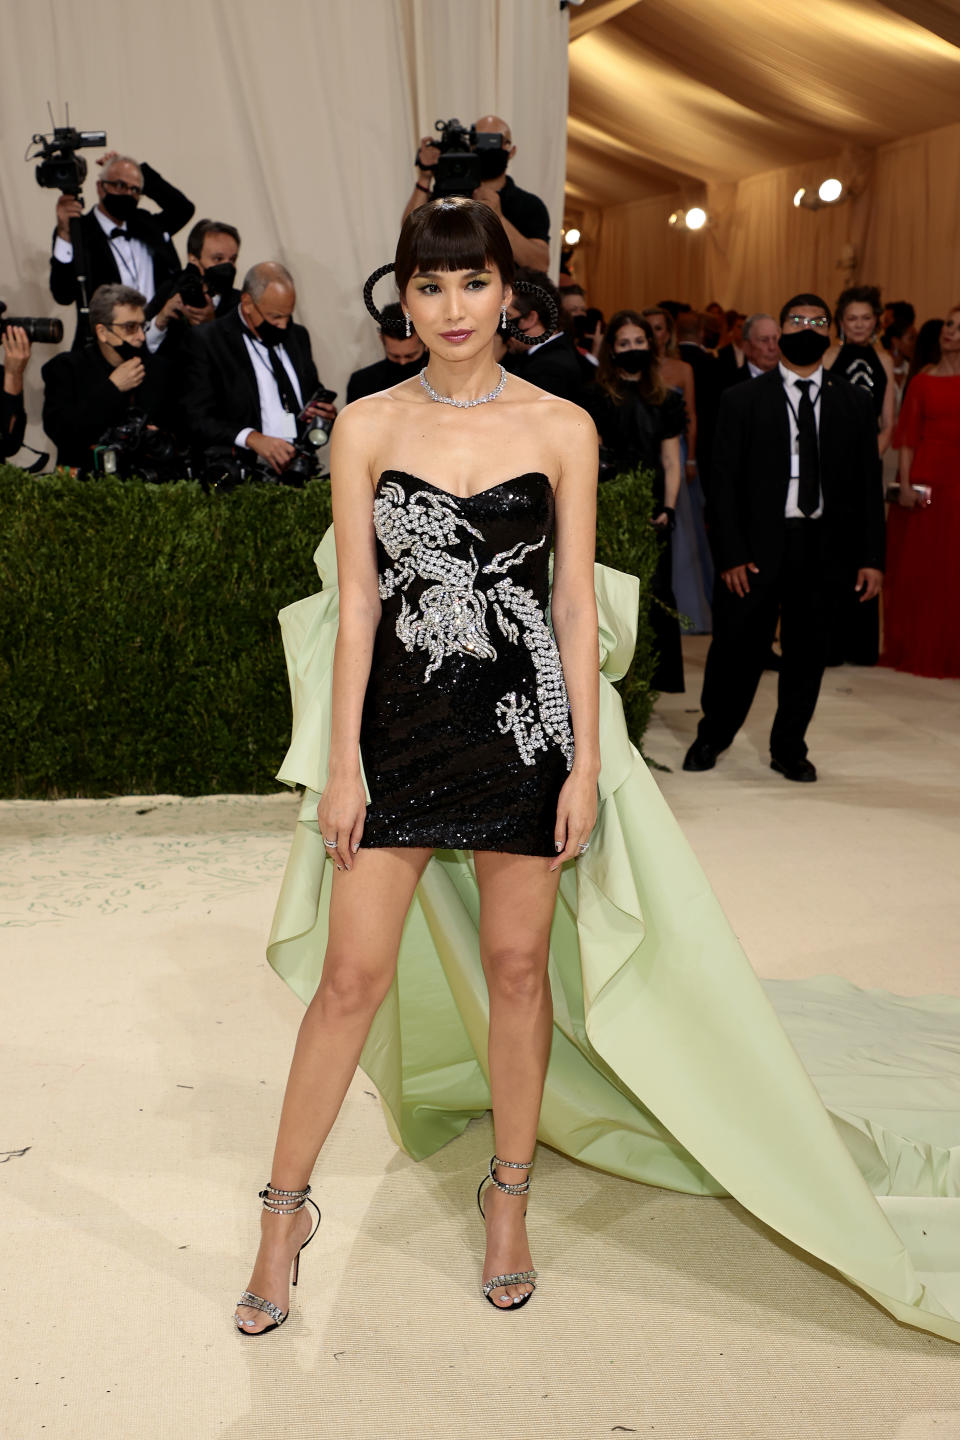 Gemma Chan attends The 2021 Met Gala Celebrating In America: A Lexicon Of Fashion at Metropolitan Museum of Art on September 13, 2021 in New York City. (Getty Images)